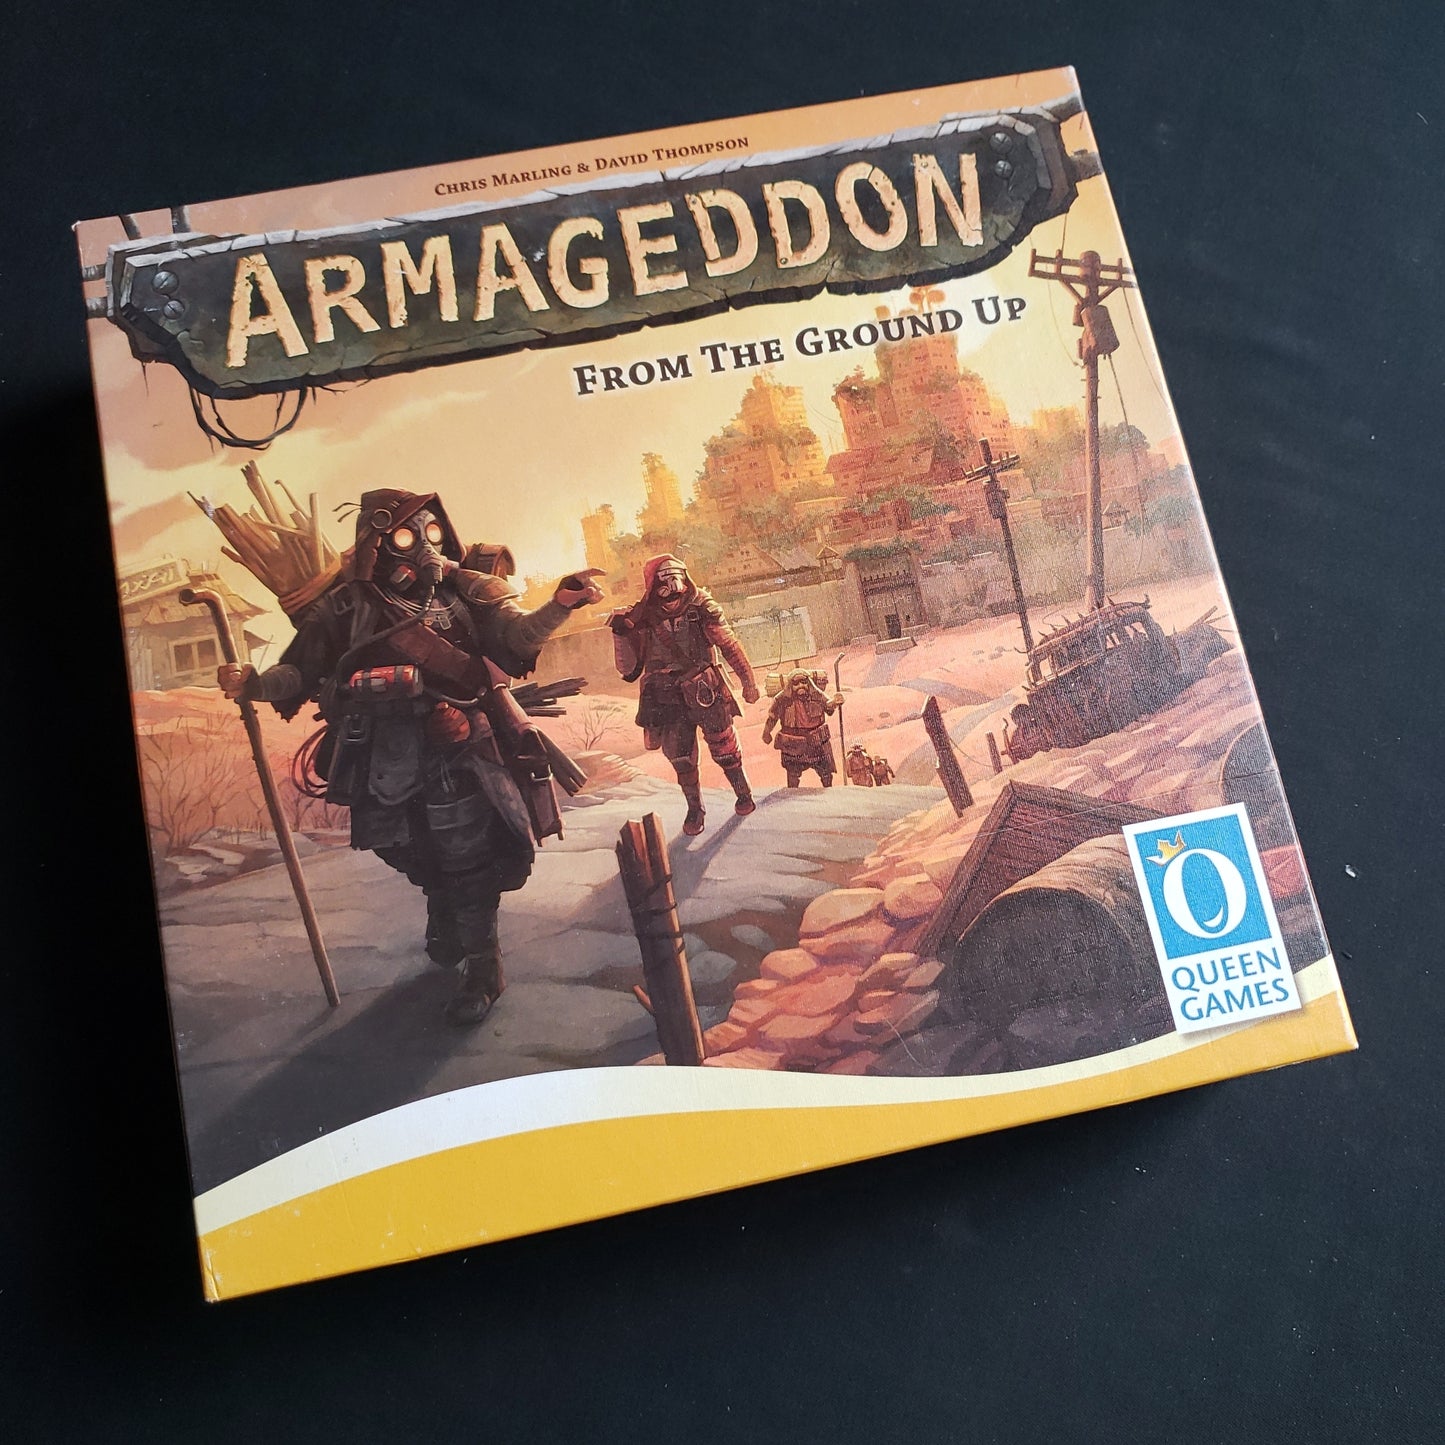 Image shows the front cover of the box of the Armageddon board game